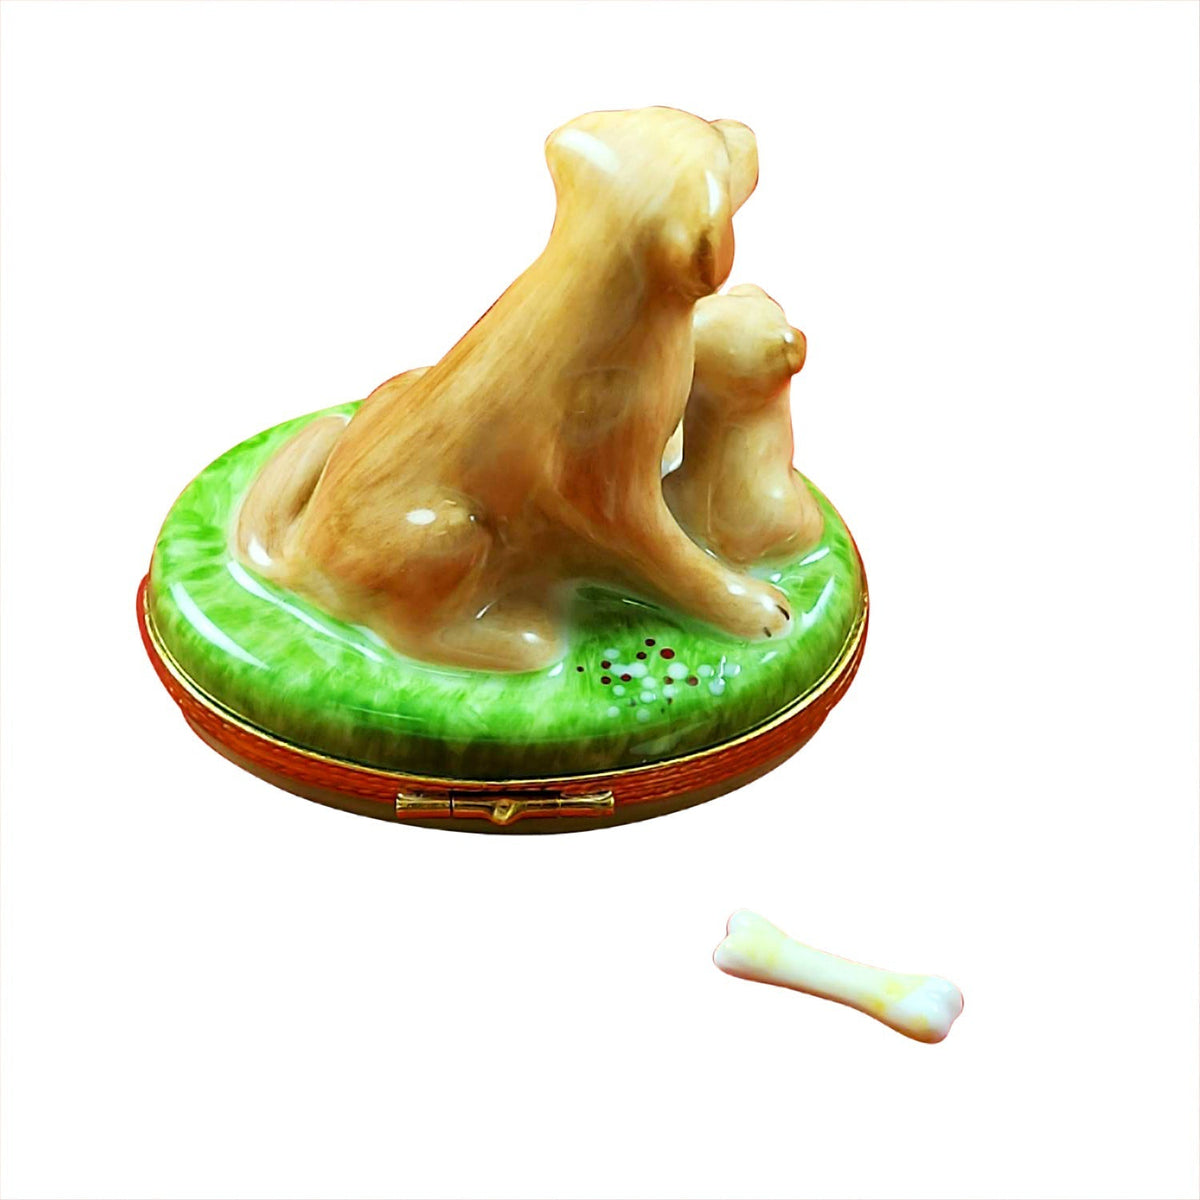 Yellow Lab & Puppy with Removable Bone - [Brand Name]